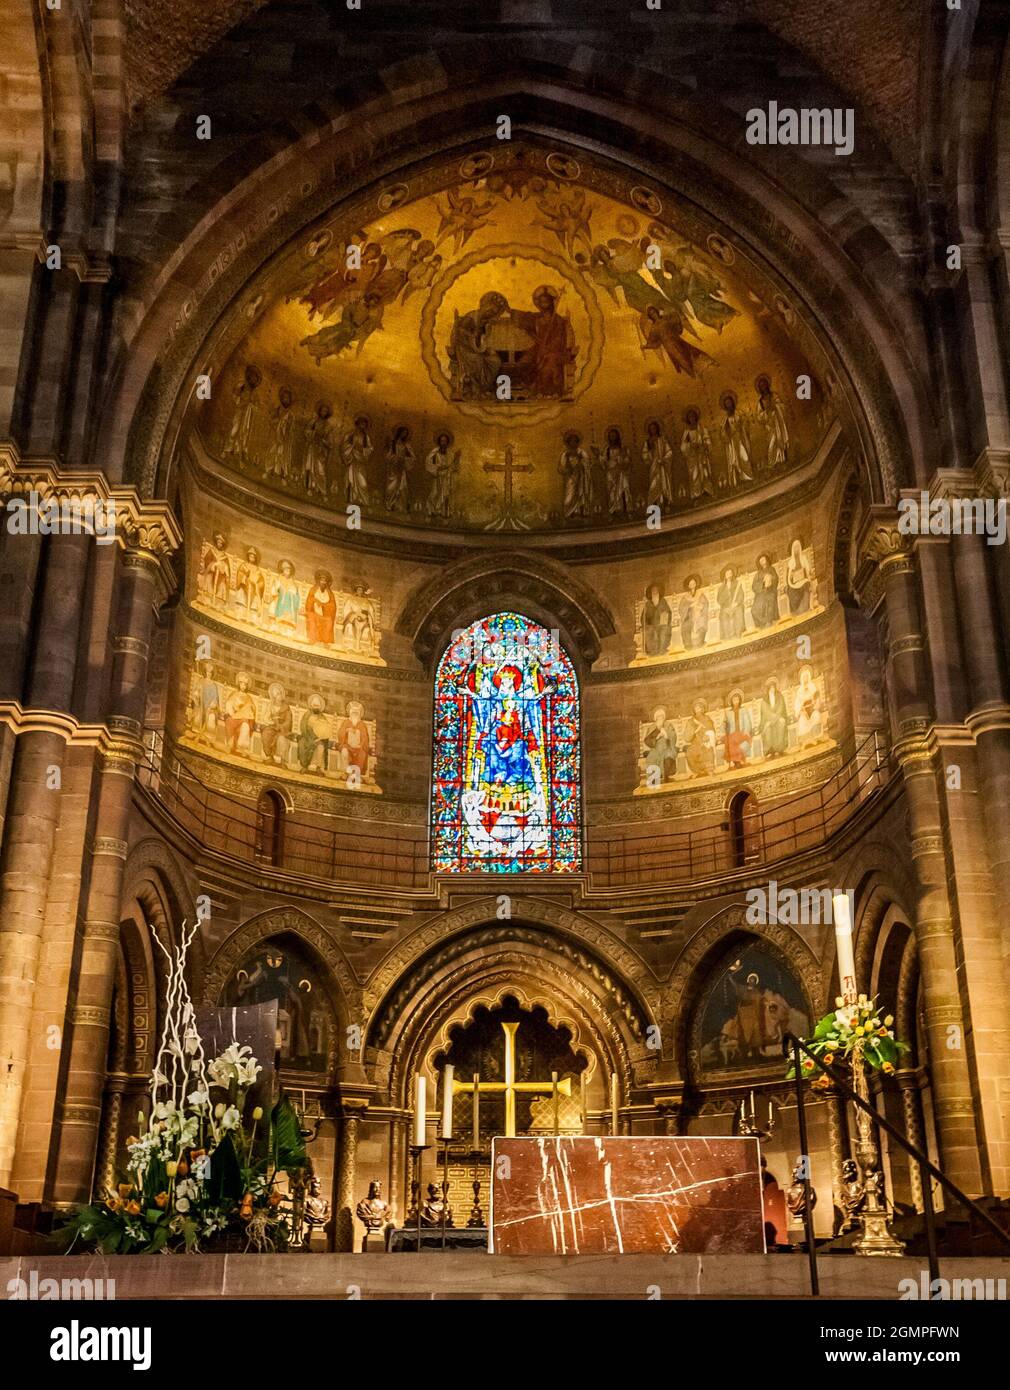 Great view of the choir on the northeast end, the apse with the Virgin of Alsace window and the main altar inside the famous Strasbourg Cathedral de... Stock Photo